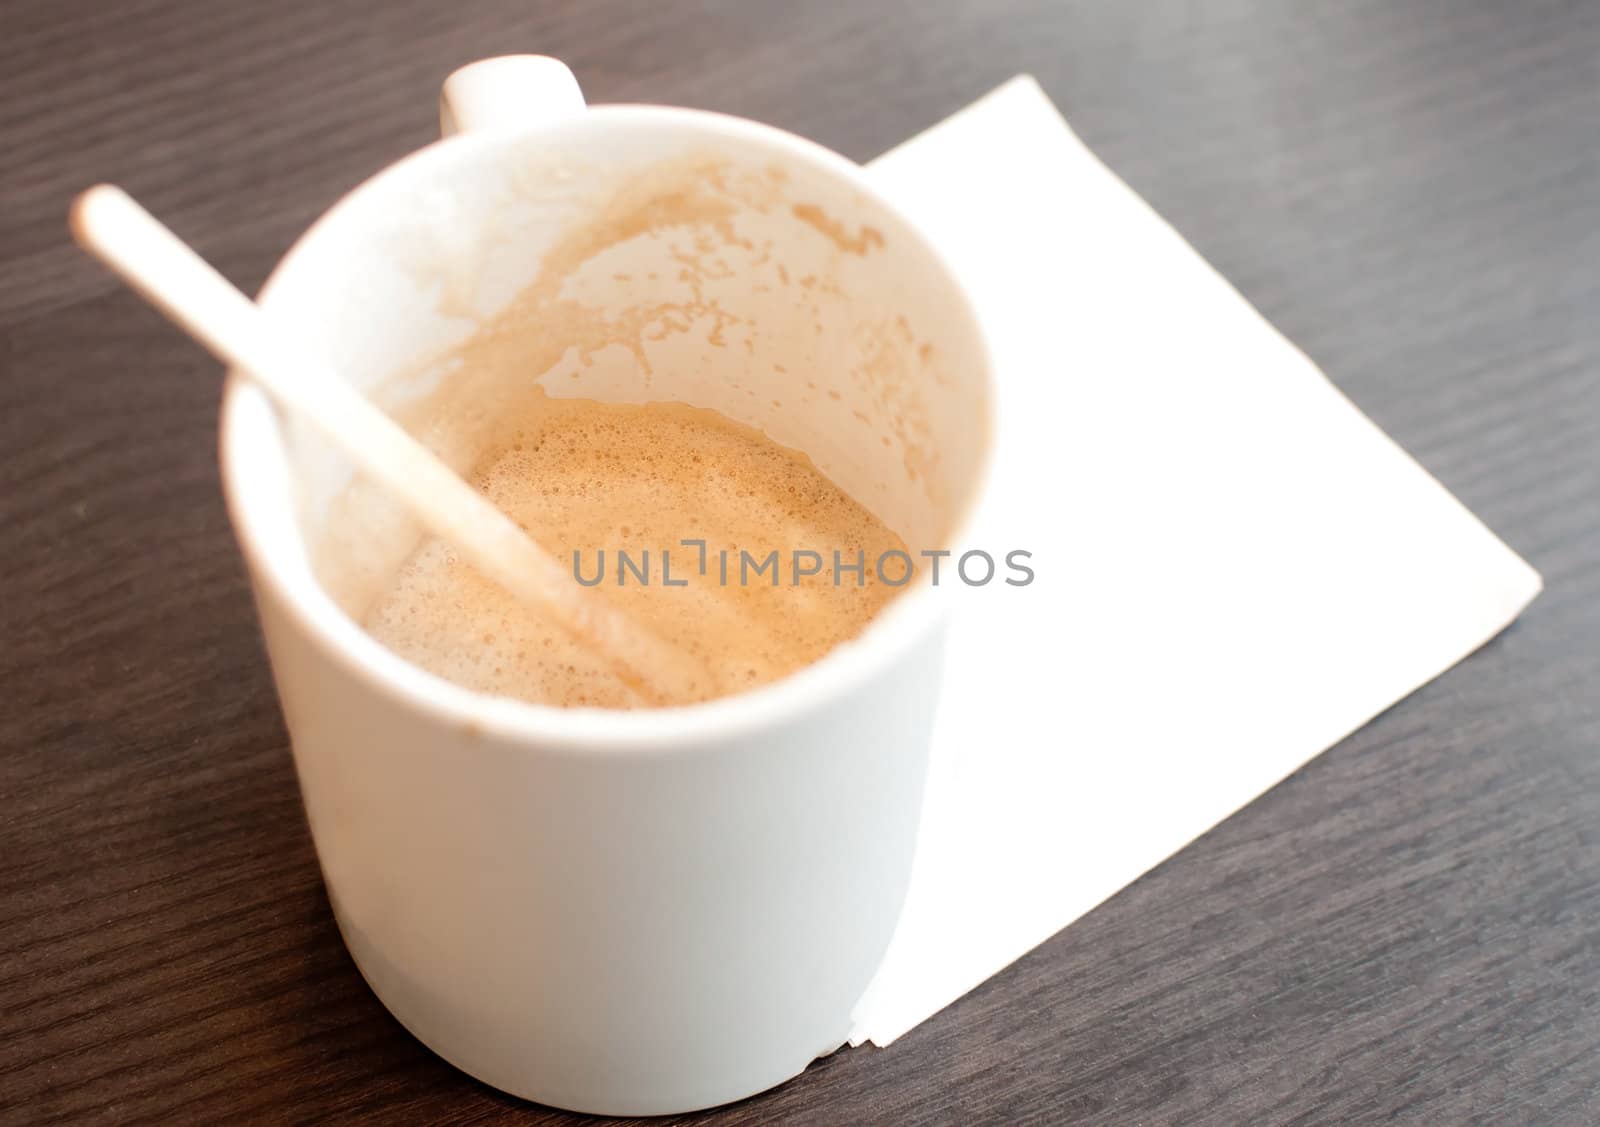 Empty cup of coffee  with white napkin space for text
on wood table